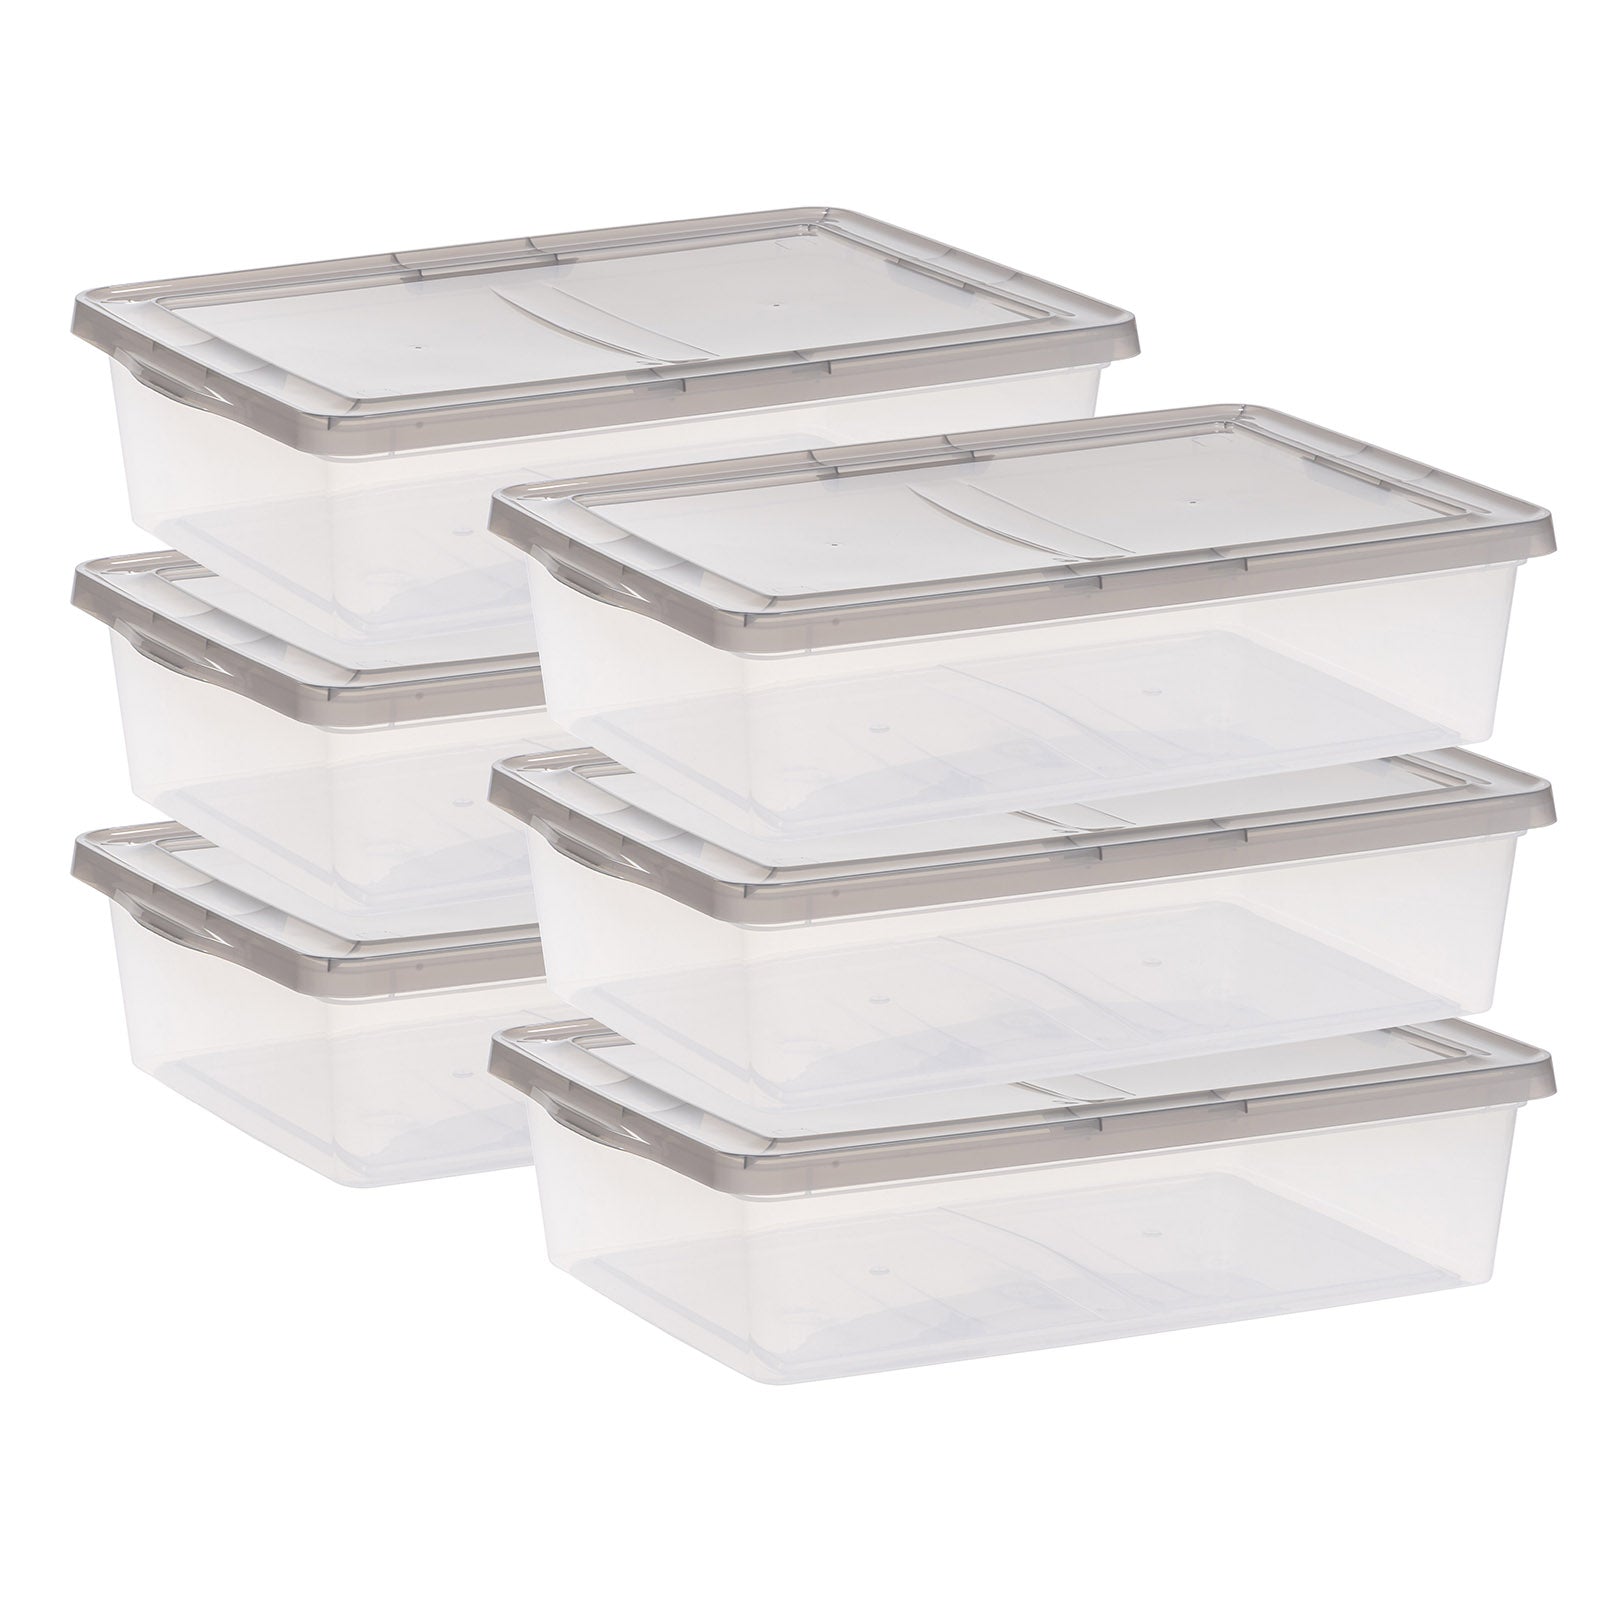 IRIS USA 15 Gallon Clear Plastic Storage Boxes with Blue Lid, Pack